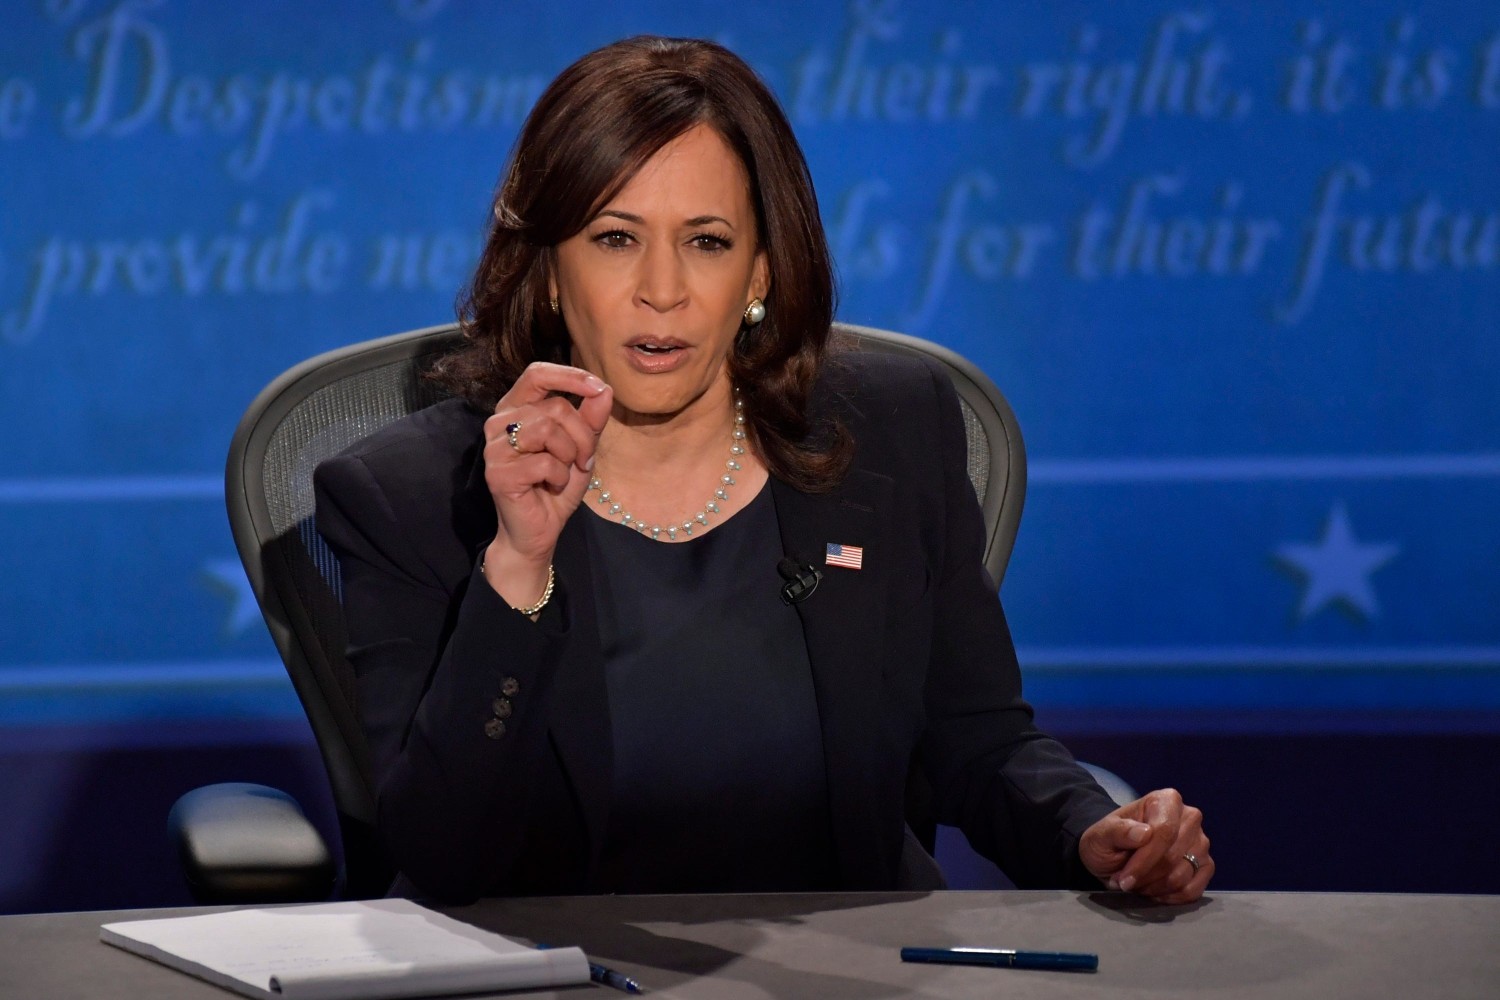 Sen. Kamala Harris speaks on stage during the Vice Presidential debate between Republican nominee Vice President Mike Pence and Democratic nominee Sen. Kamala Harris held at Kingsbury Hall at The University of Utah in Salt Lake City on Oct. 7, 2020. Susan Page, Washington Bureau Chief for USA TODAY, is the moderator. Jack Gruber, USA TODAY